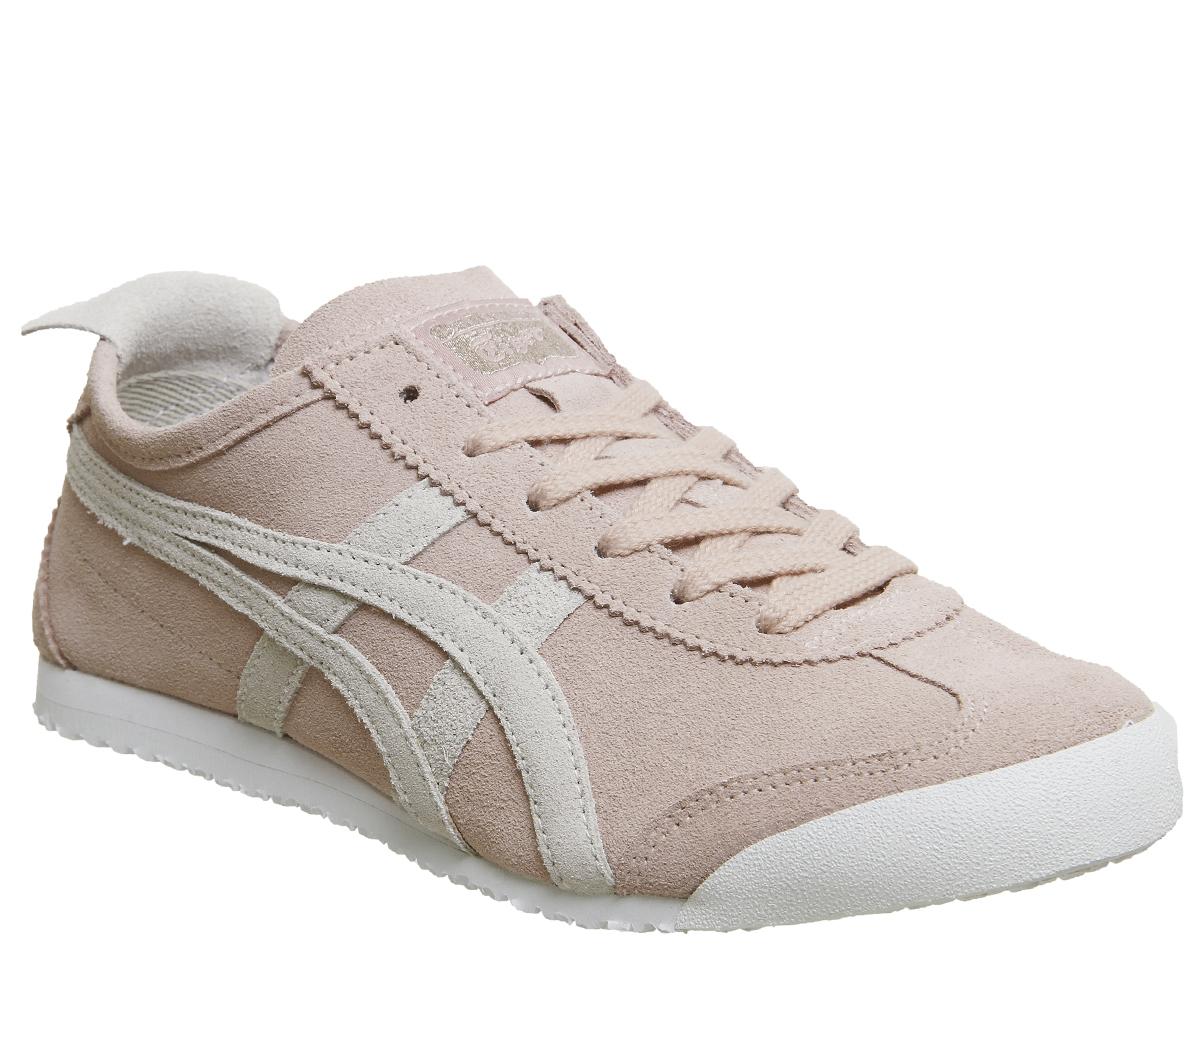 Mexico 66 Trainers Pink Grey Suede 